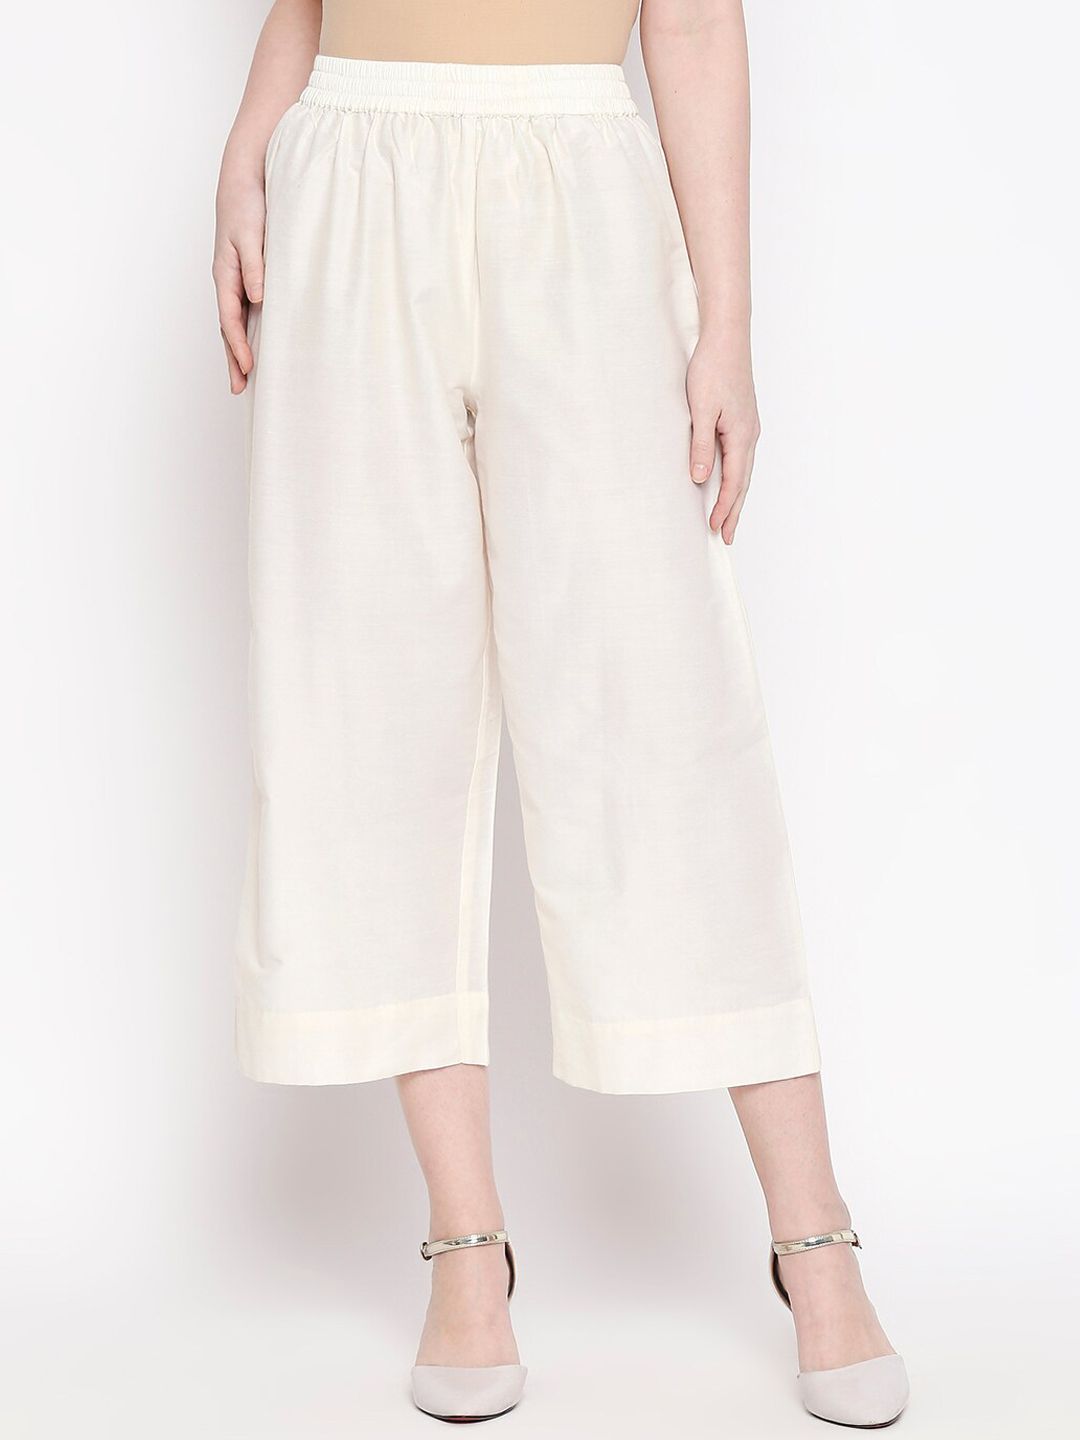 RANGMANCH BY PANTALOONS Women Off-White Culottes Price in India